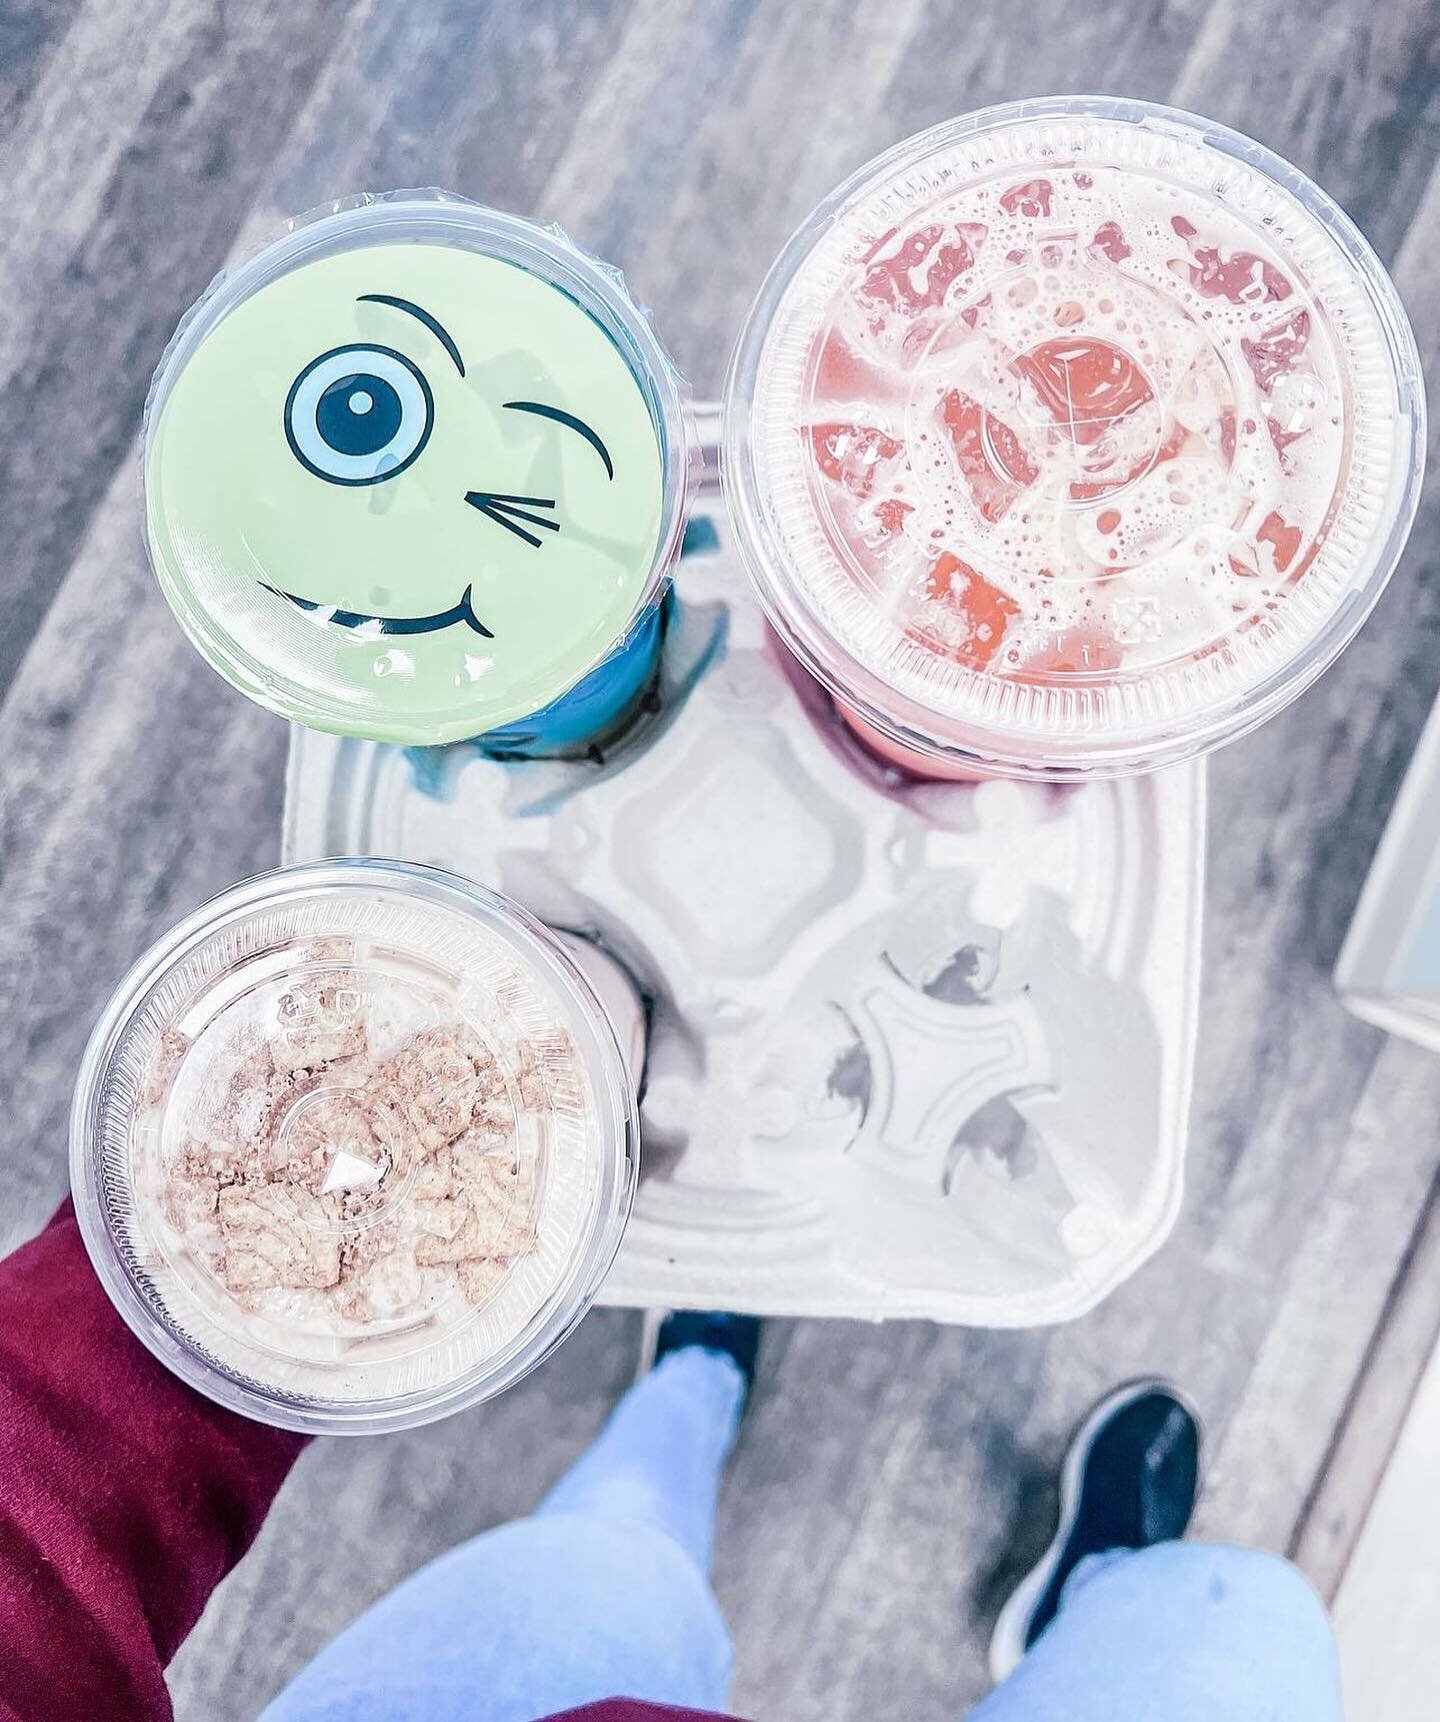 Beat the Monday blues by coming in for your meal shakes, energy teas and/or protein donuts before heading into work! 

You may crack a smile even at 7am 😍

#chillnutrition #lodihealthydrinks #proteinshakes #postworkout #results #healthymeal